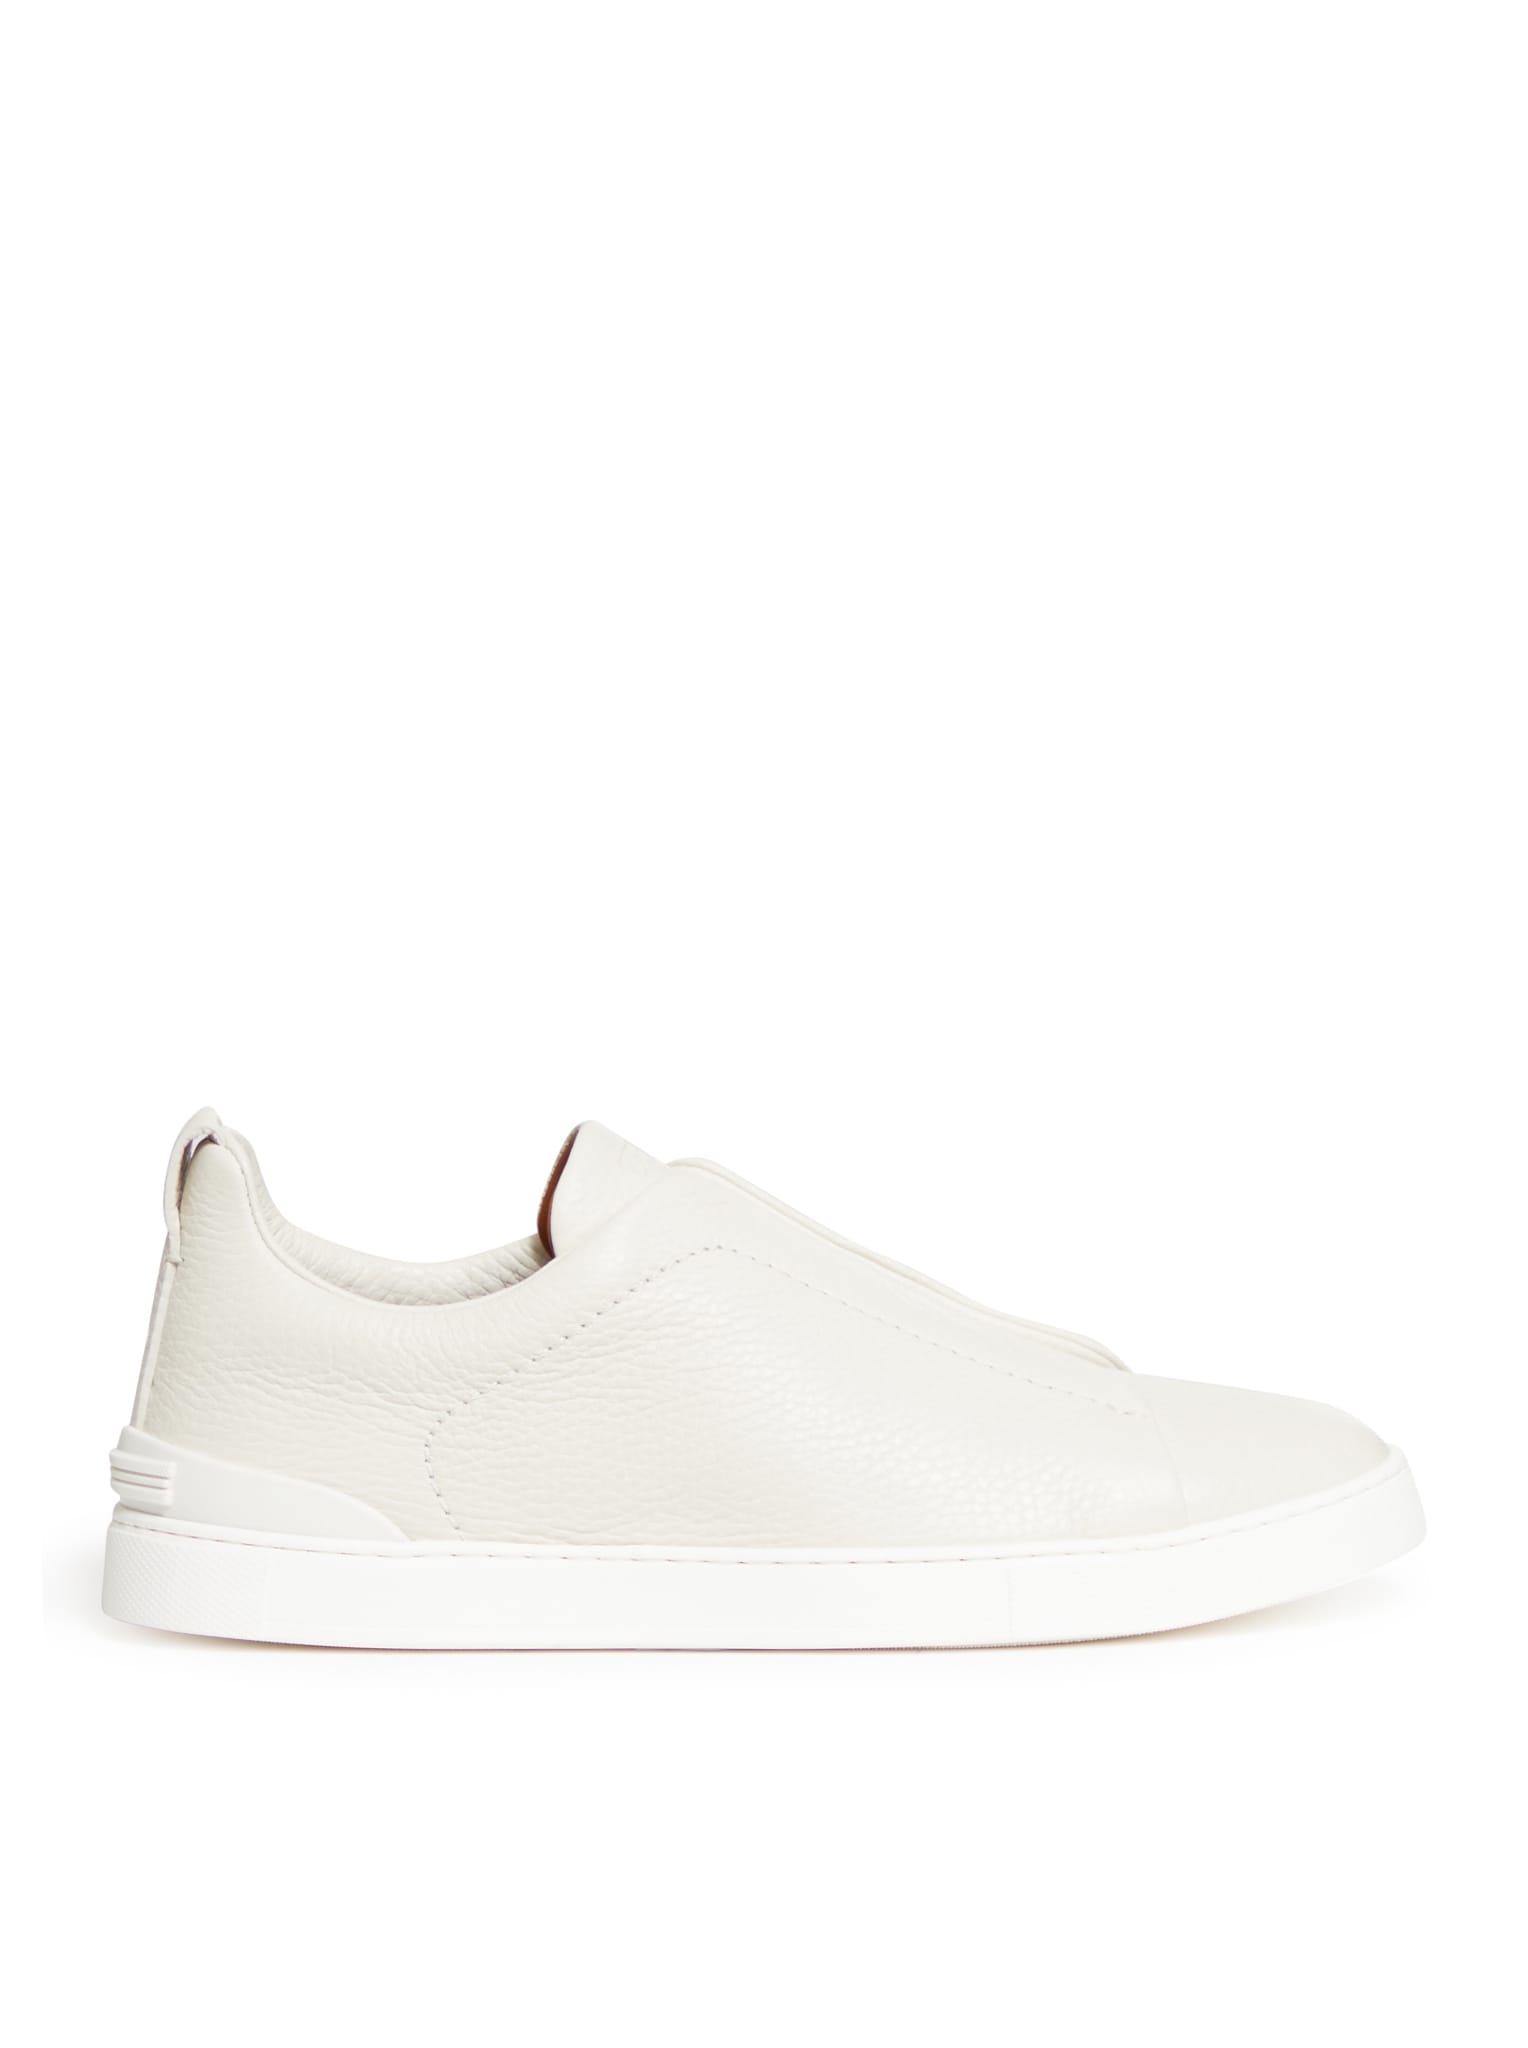 Zegna Snk-sneakers In Pan White